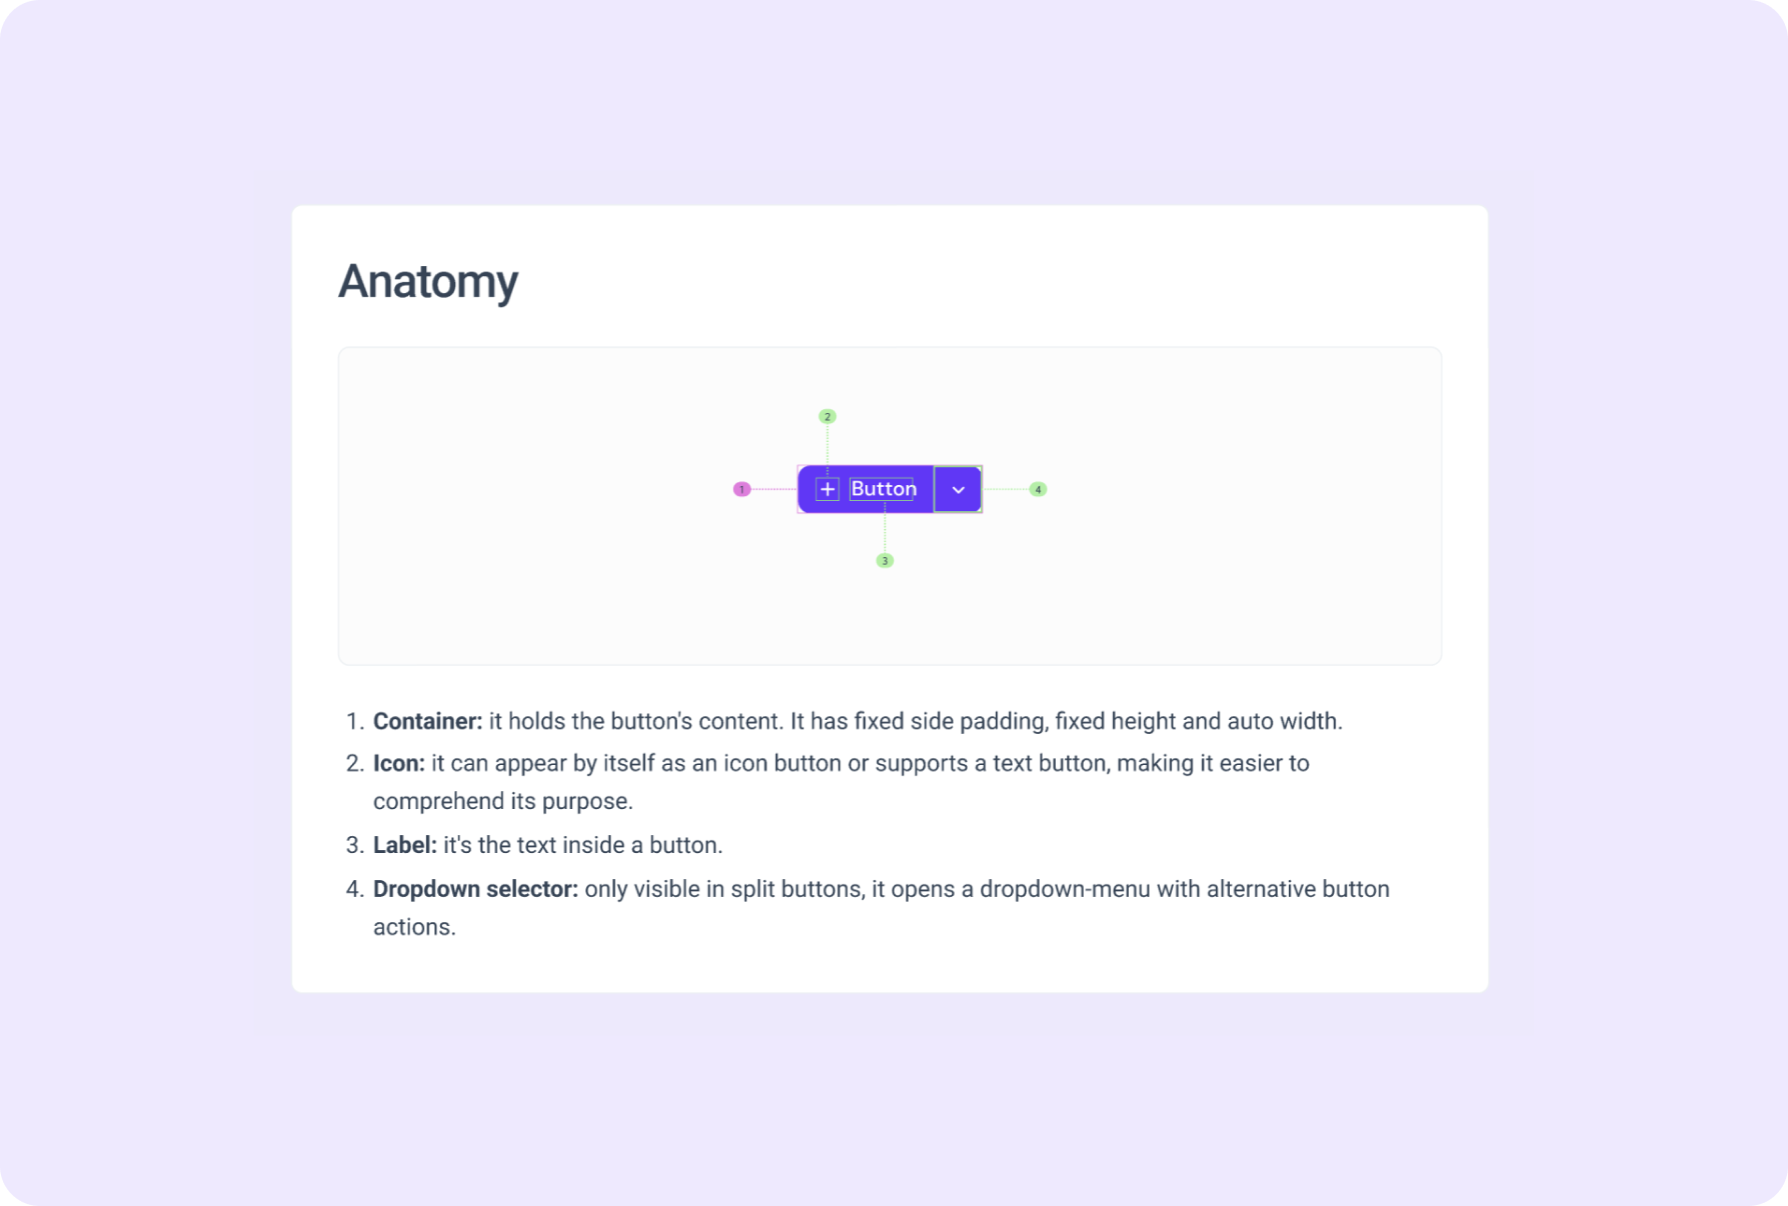 Snapshot of the Button anatomy guidelines, featuring a legend explaining each part of the component, including container, icon, label and dropdown selector.